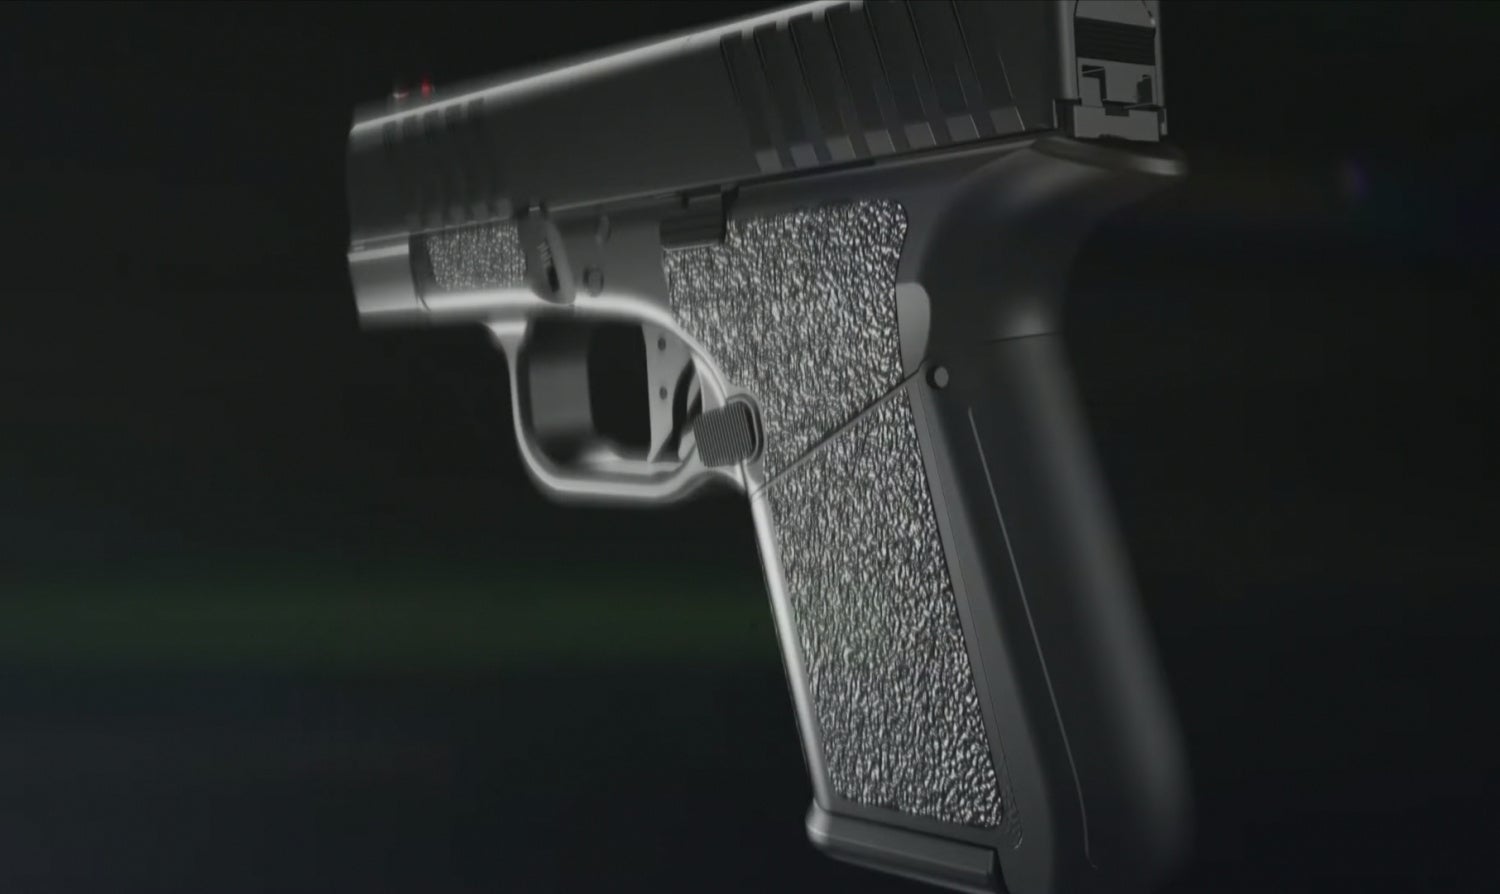 GForce Arms Tease Their First Pistol: The GF9 EQUALIZER